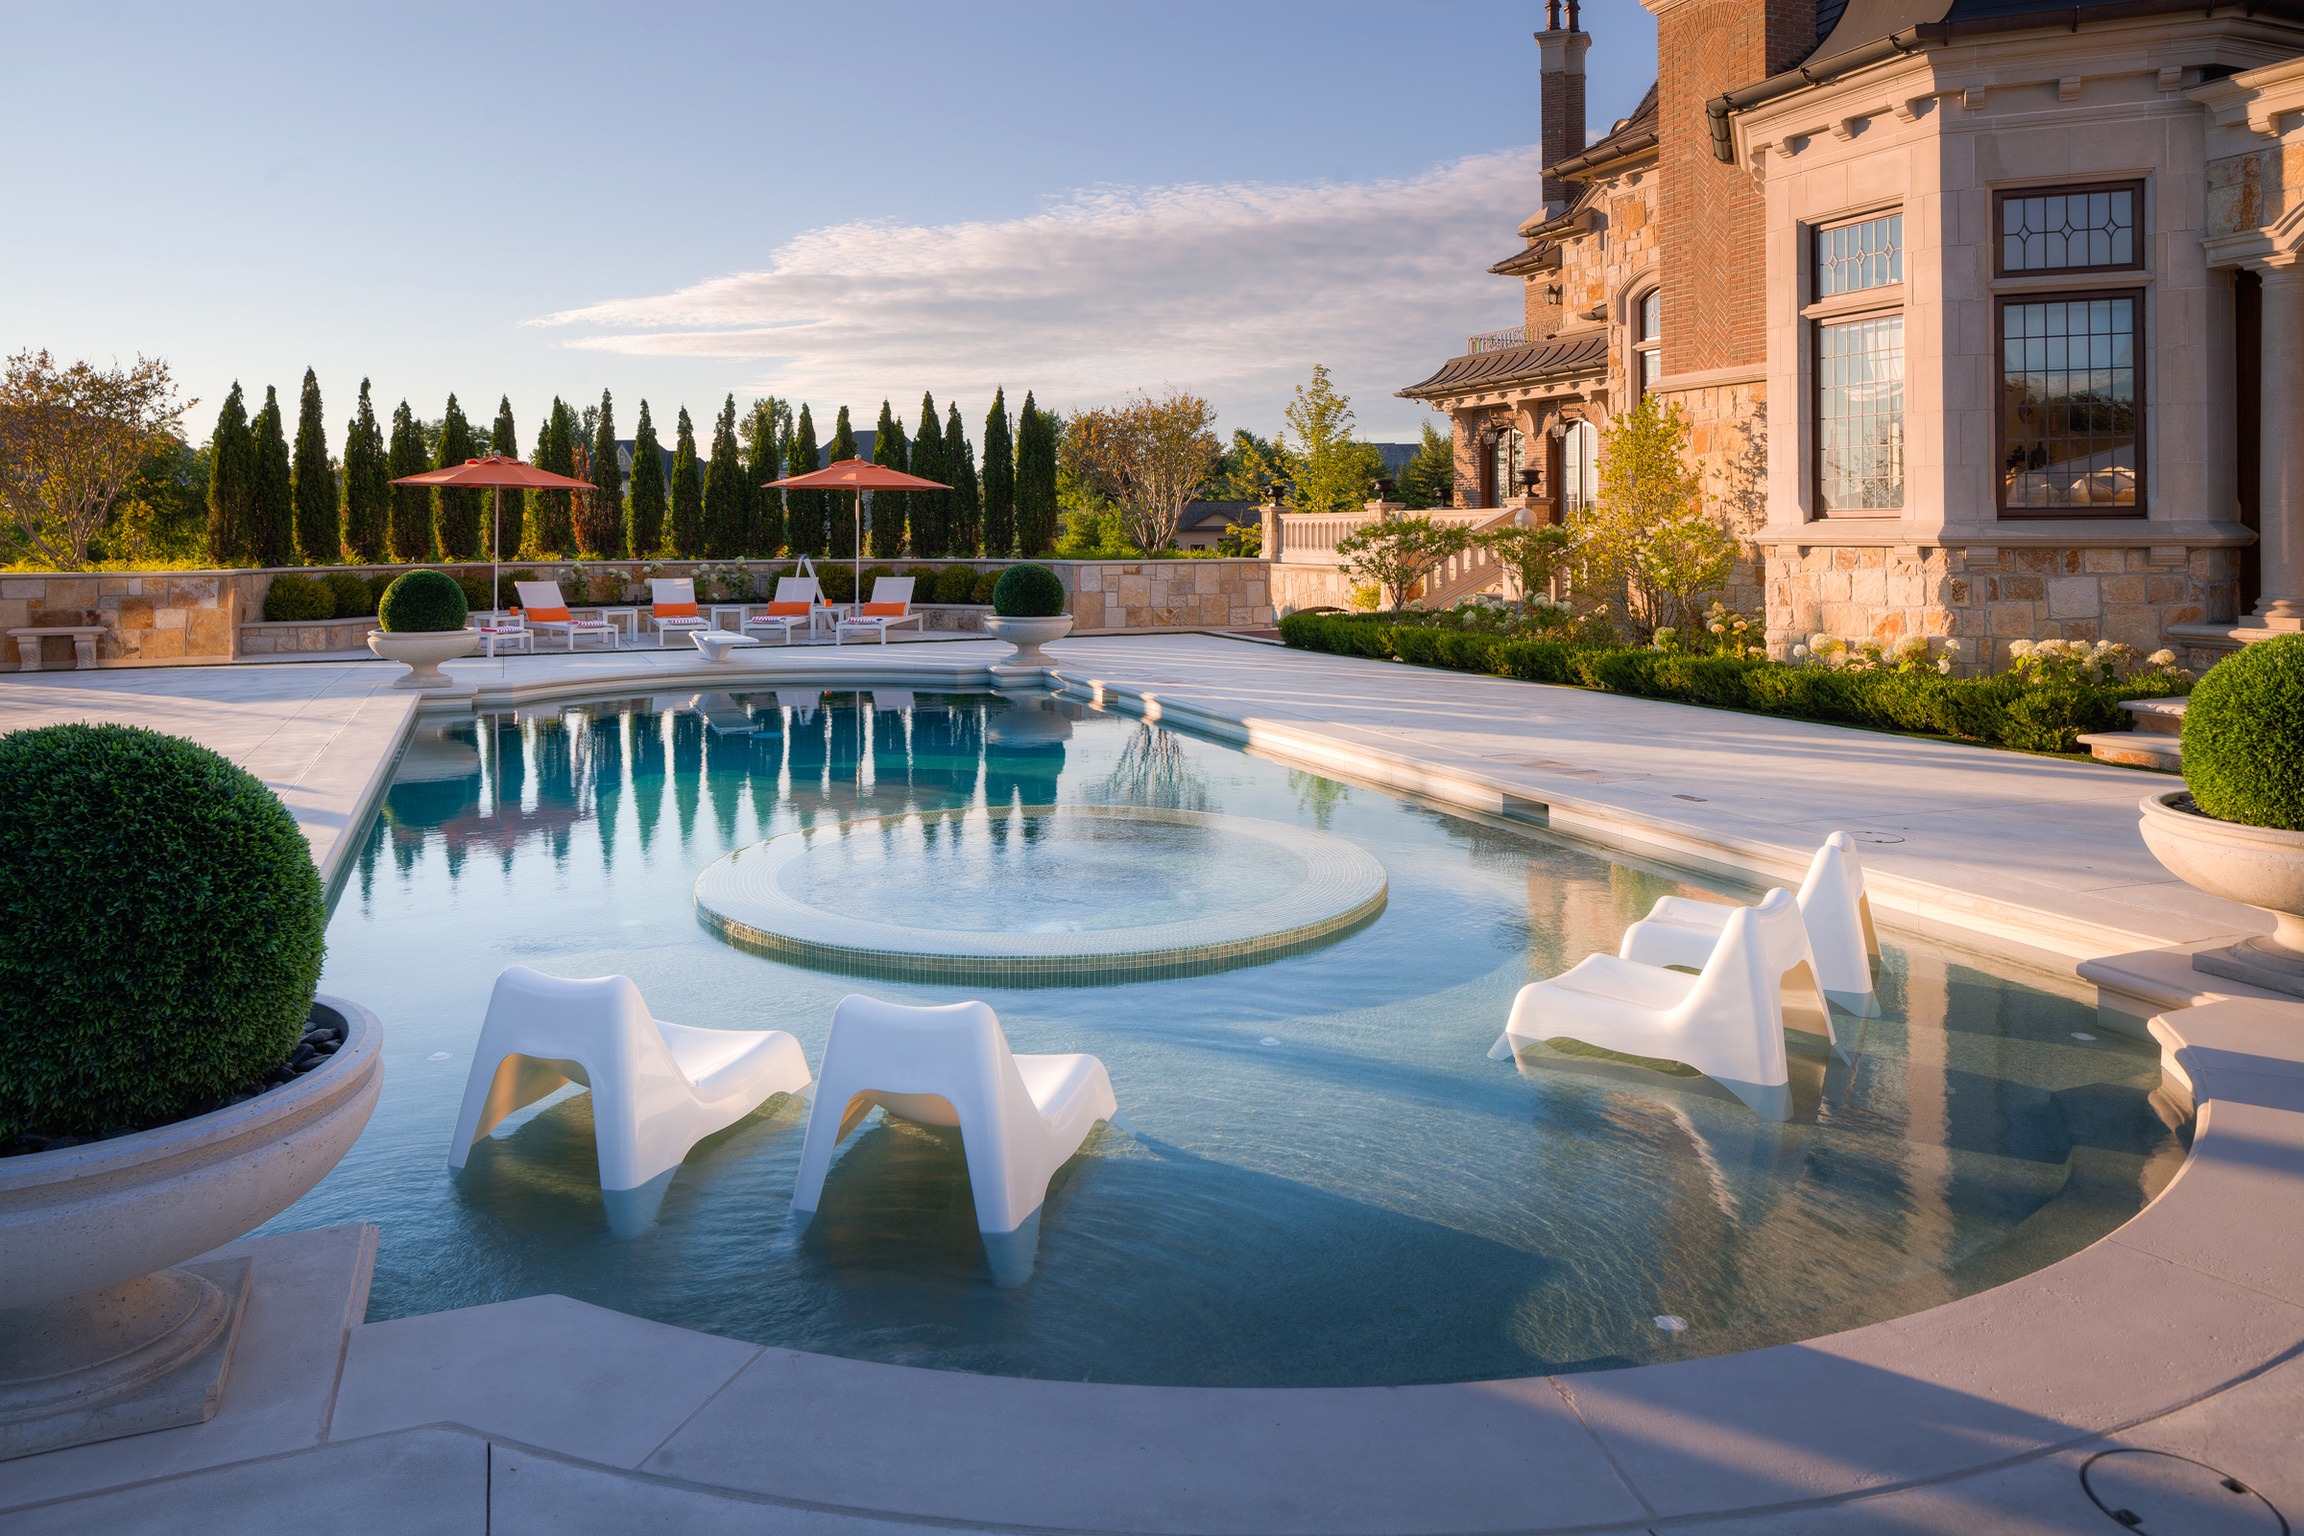 An expansive, tranquil outdoor swimming pool with modern loungers surrounded by landscaped greenery and a luxurious house bathed in warm sunlight.